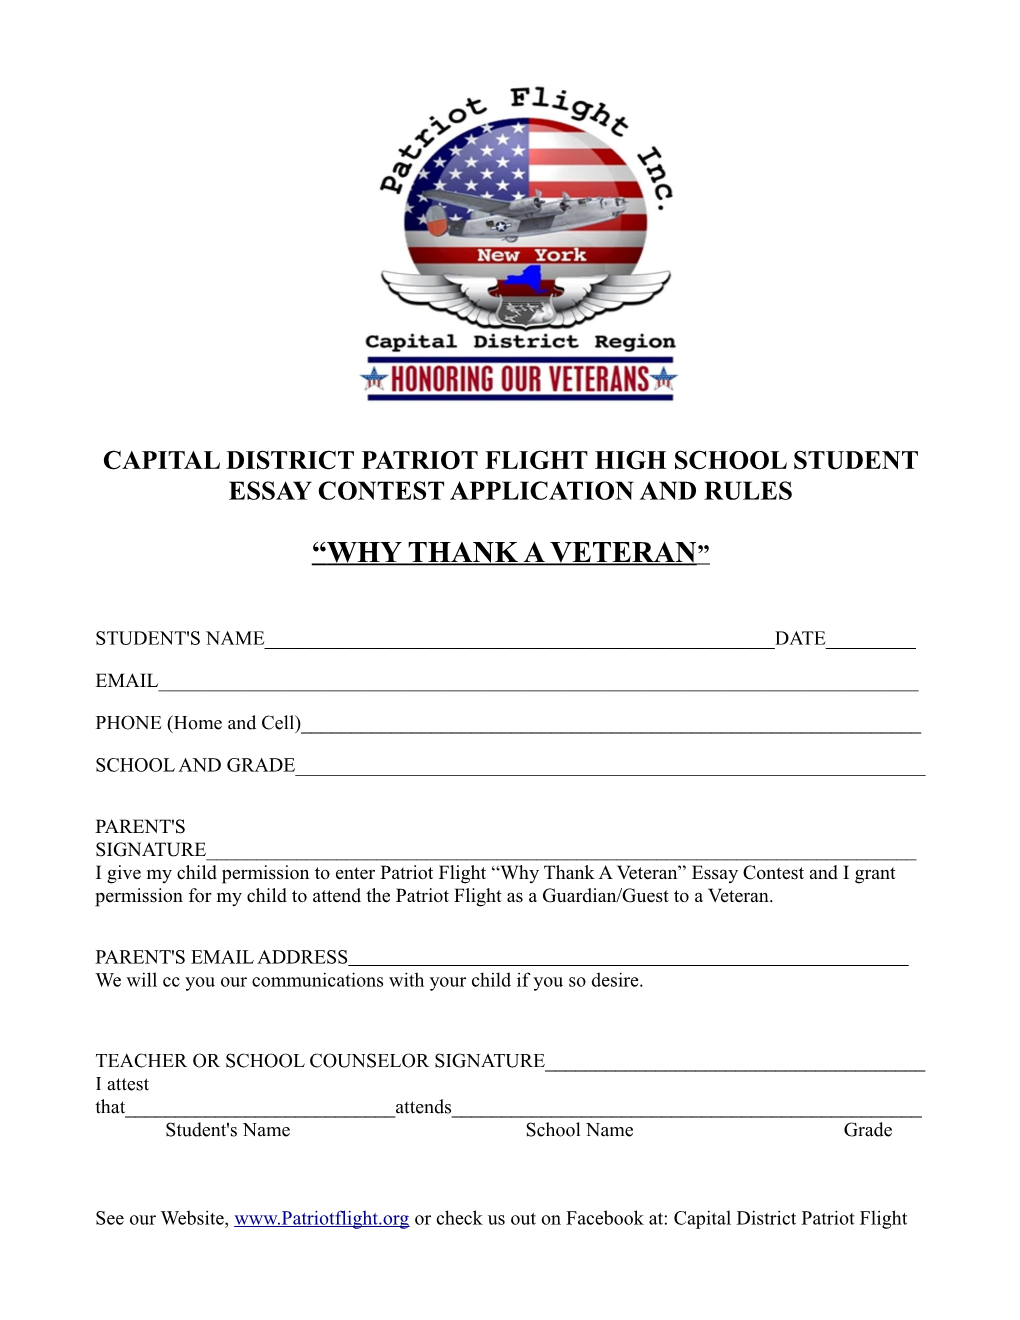 Capital District Patriot Flight High School Student Essay Contest Application and Rules